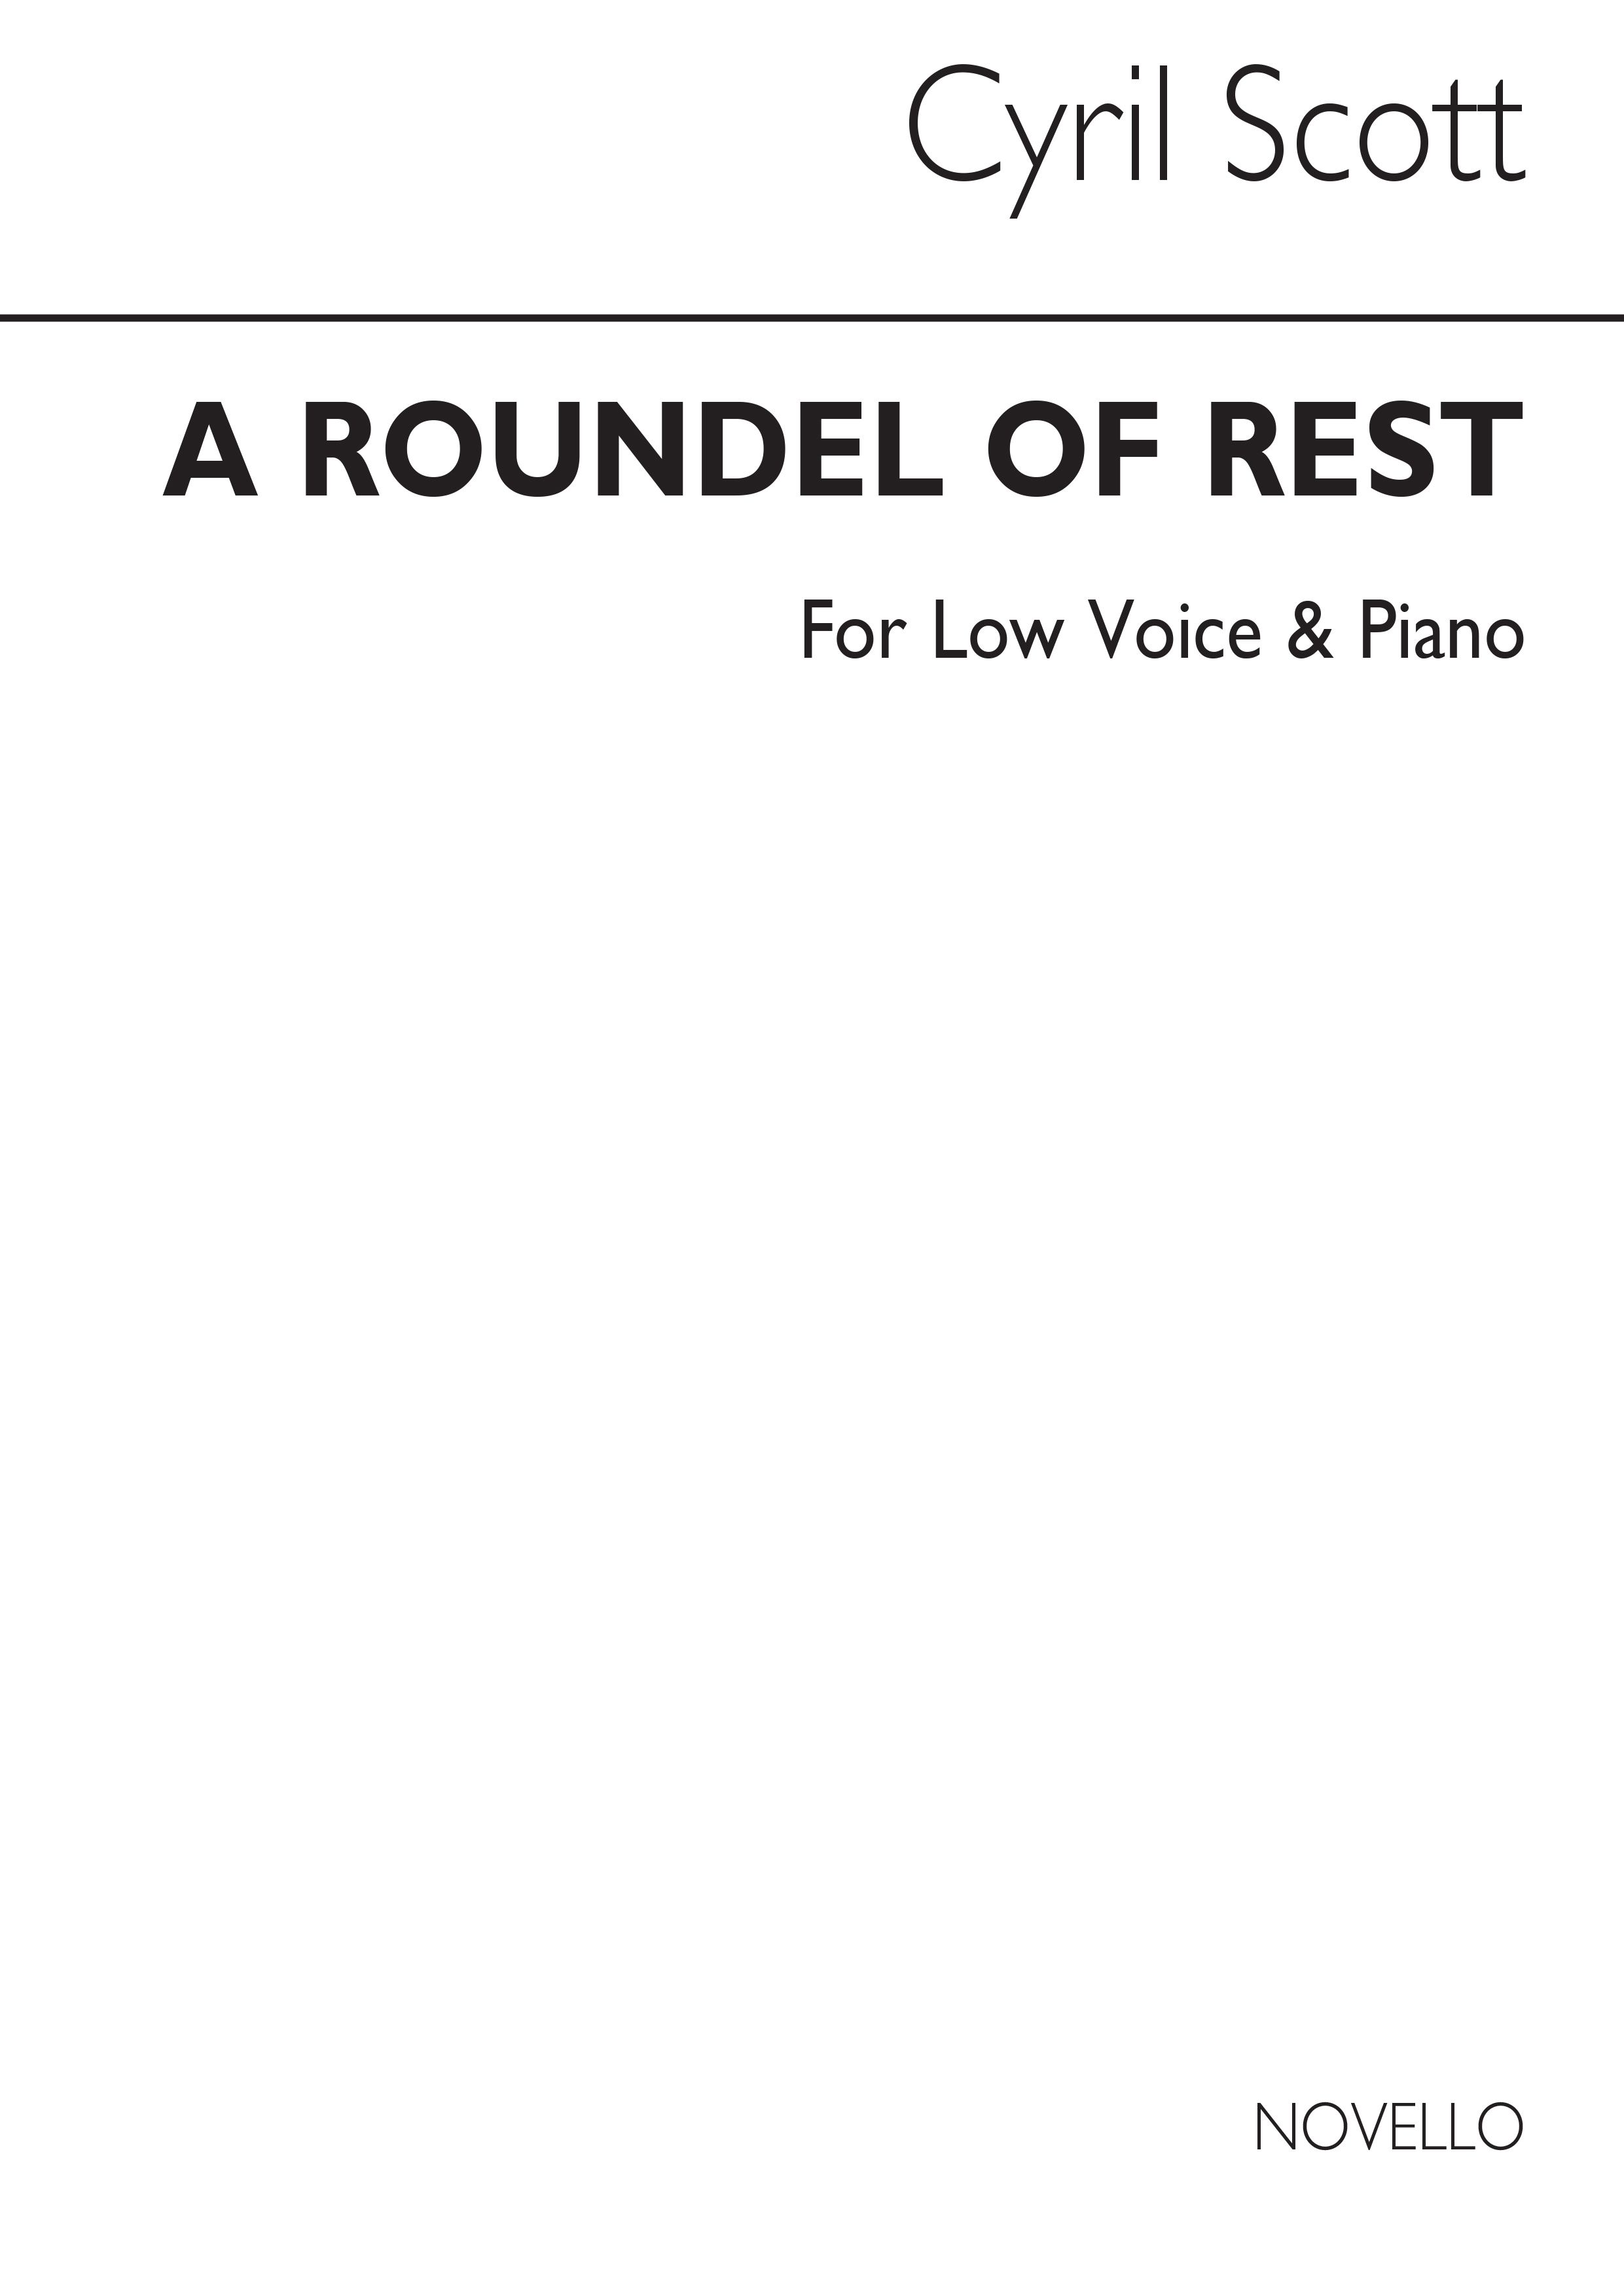 Cyril Scott: A Roundel Of Rest Op52 No.2-low Voice/Piano (Key-c)